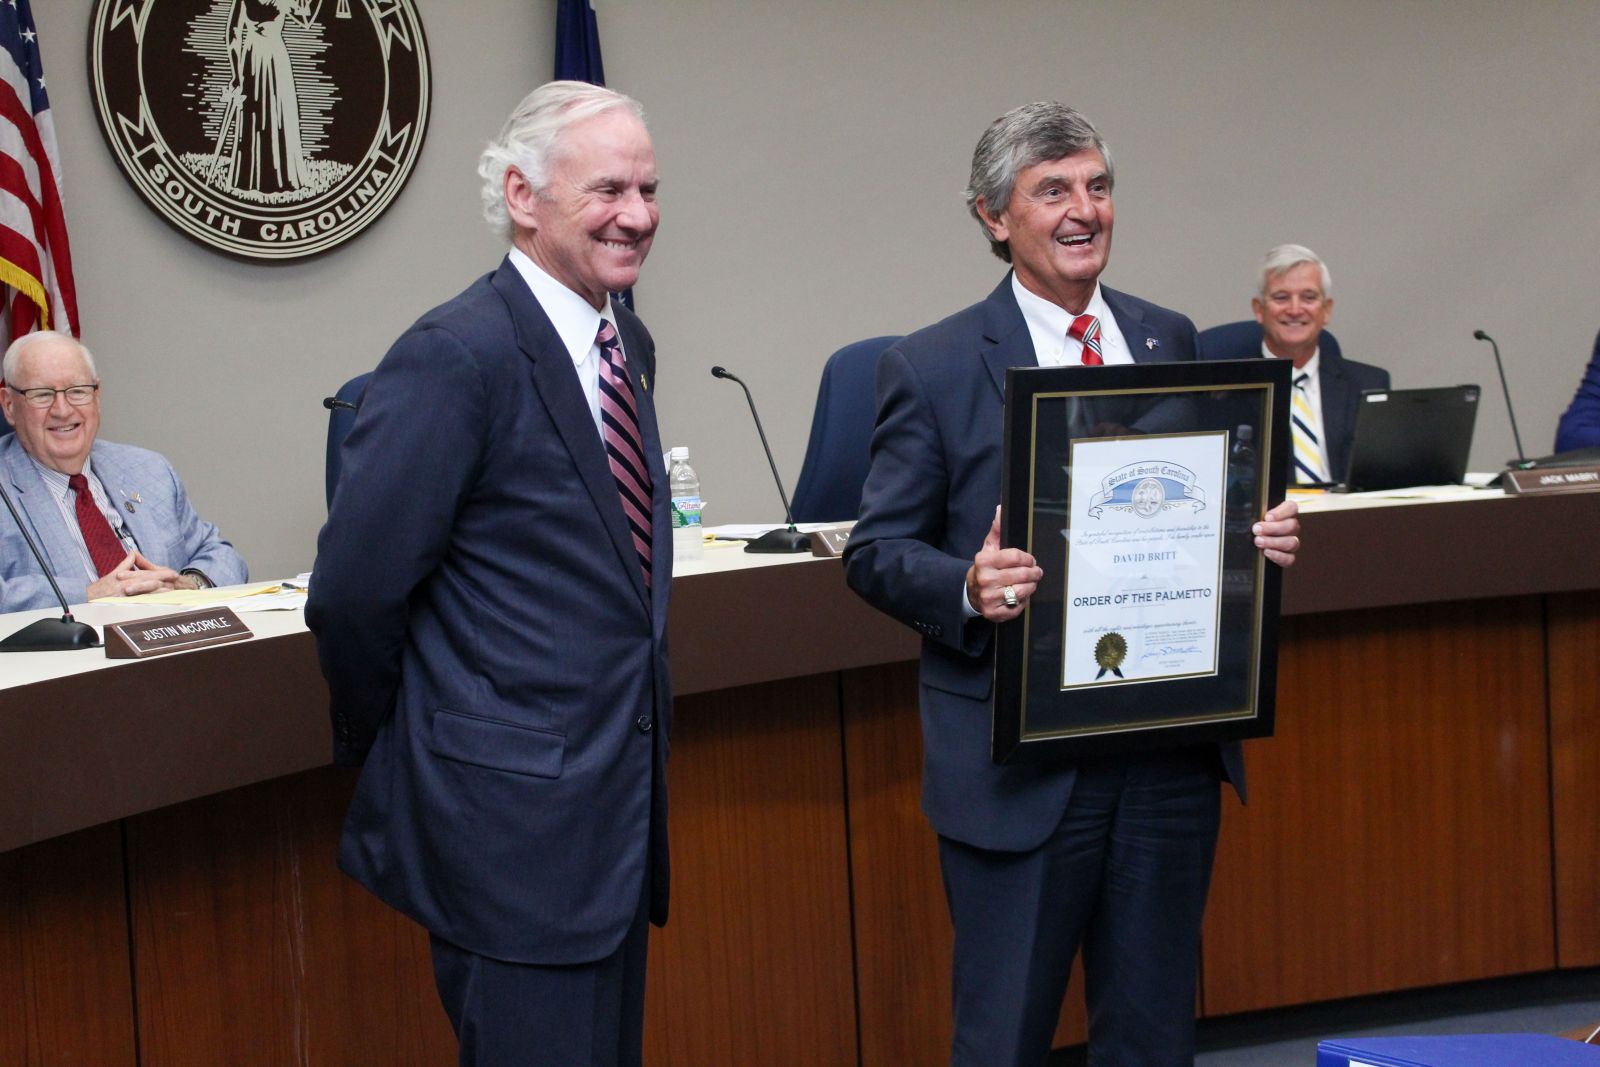  Gov. Henry McMaster presents David Britt with the Order of the Palmetto during a Spartanburg County Council meeting. Britt, vice president and general manager of Tindall Corp.'s South Carolina division, has served on the council since 1991. (Photo/Provided)